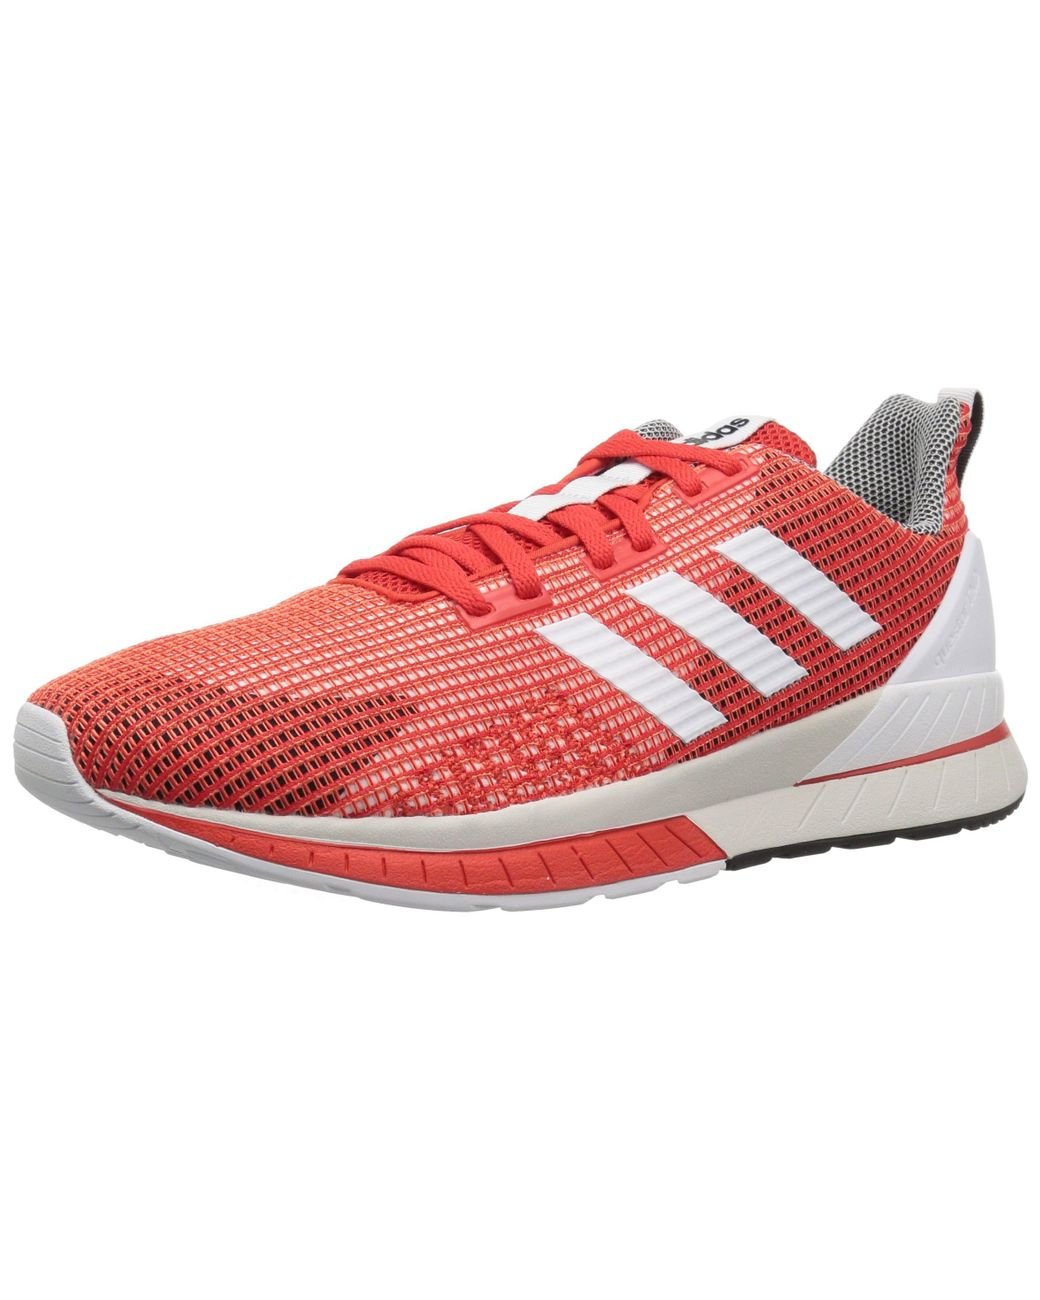 adidas Questar Tnd Running Shoe in Red for Men - Save 15% - Lyst